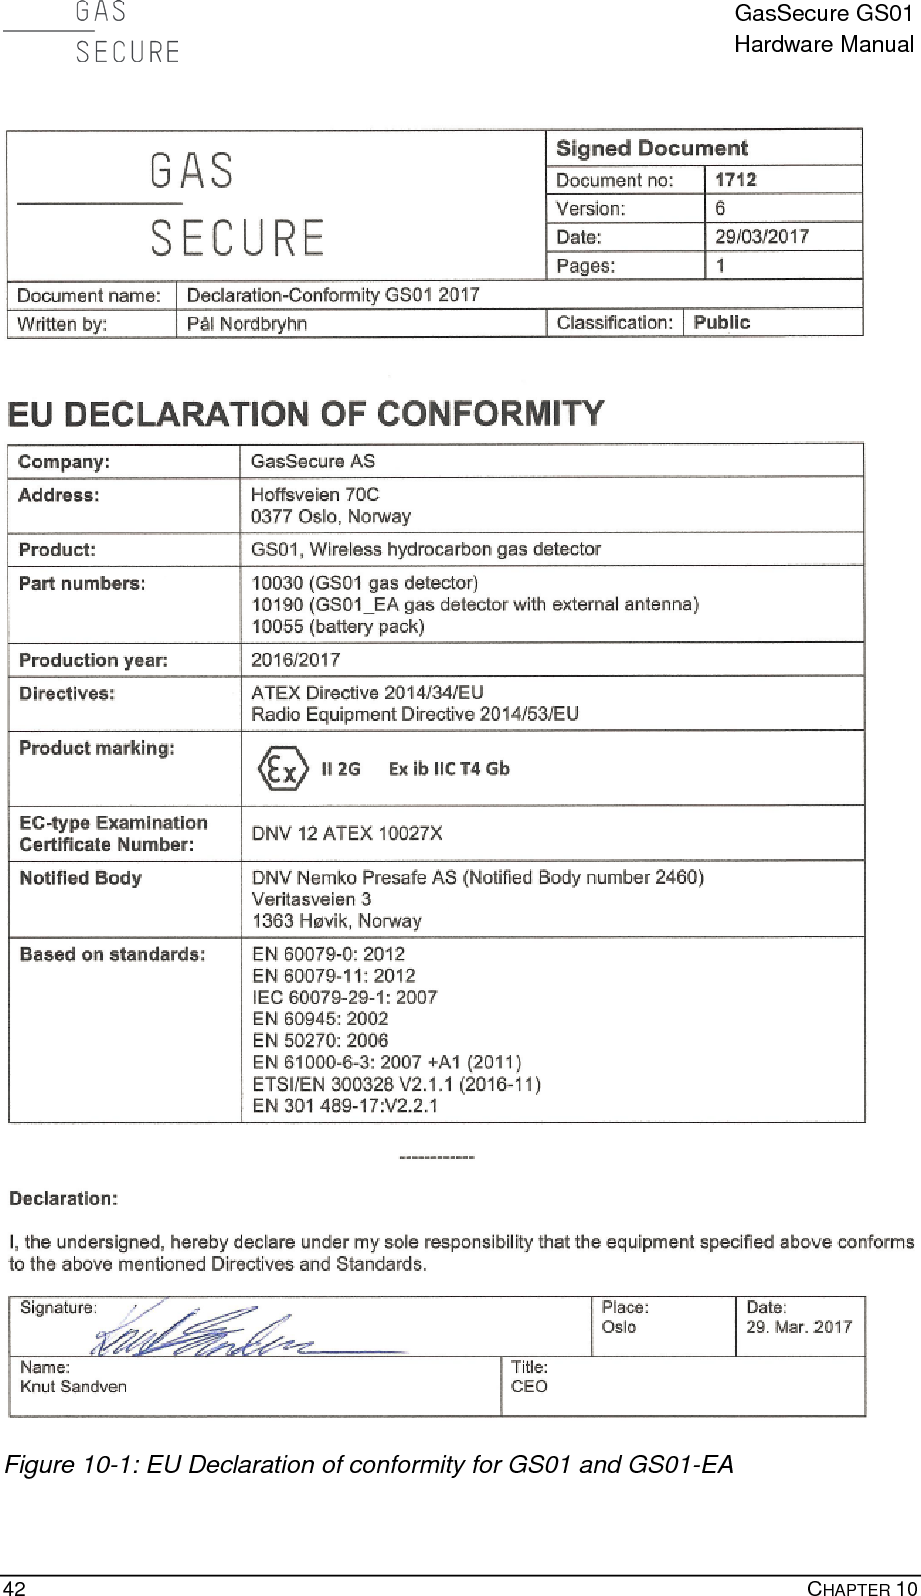  GasSecure GS01 Hardware Manual  42    CHAPTER 10      Figure 10-1: EU Declaration of conformity for GS01 and GS01-EA 